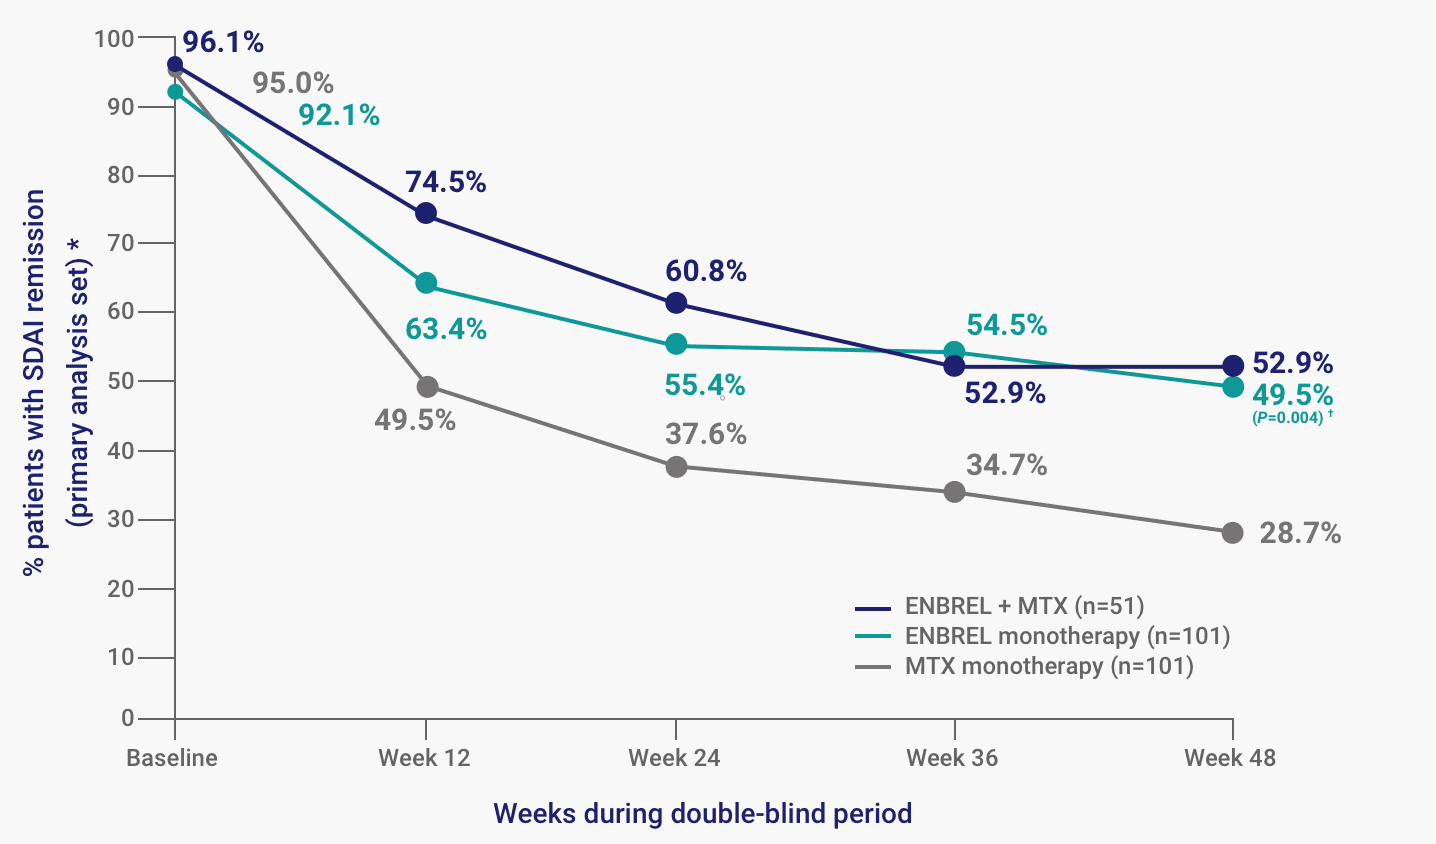 The percent of patients with SDAI remission at Week 48 of the SEAM-RA study was 52.9% for ENBREL plus MTX combination therapy, 49.5% for ENBREL monotherapy, and 28.7% for MTX monotherapy